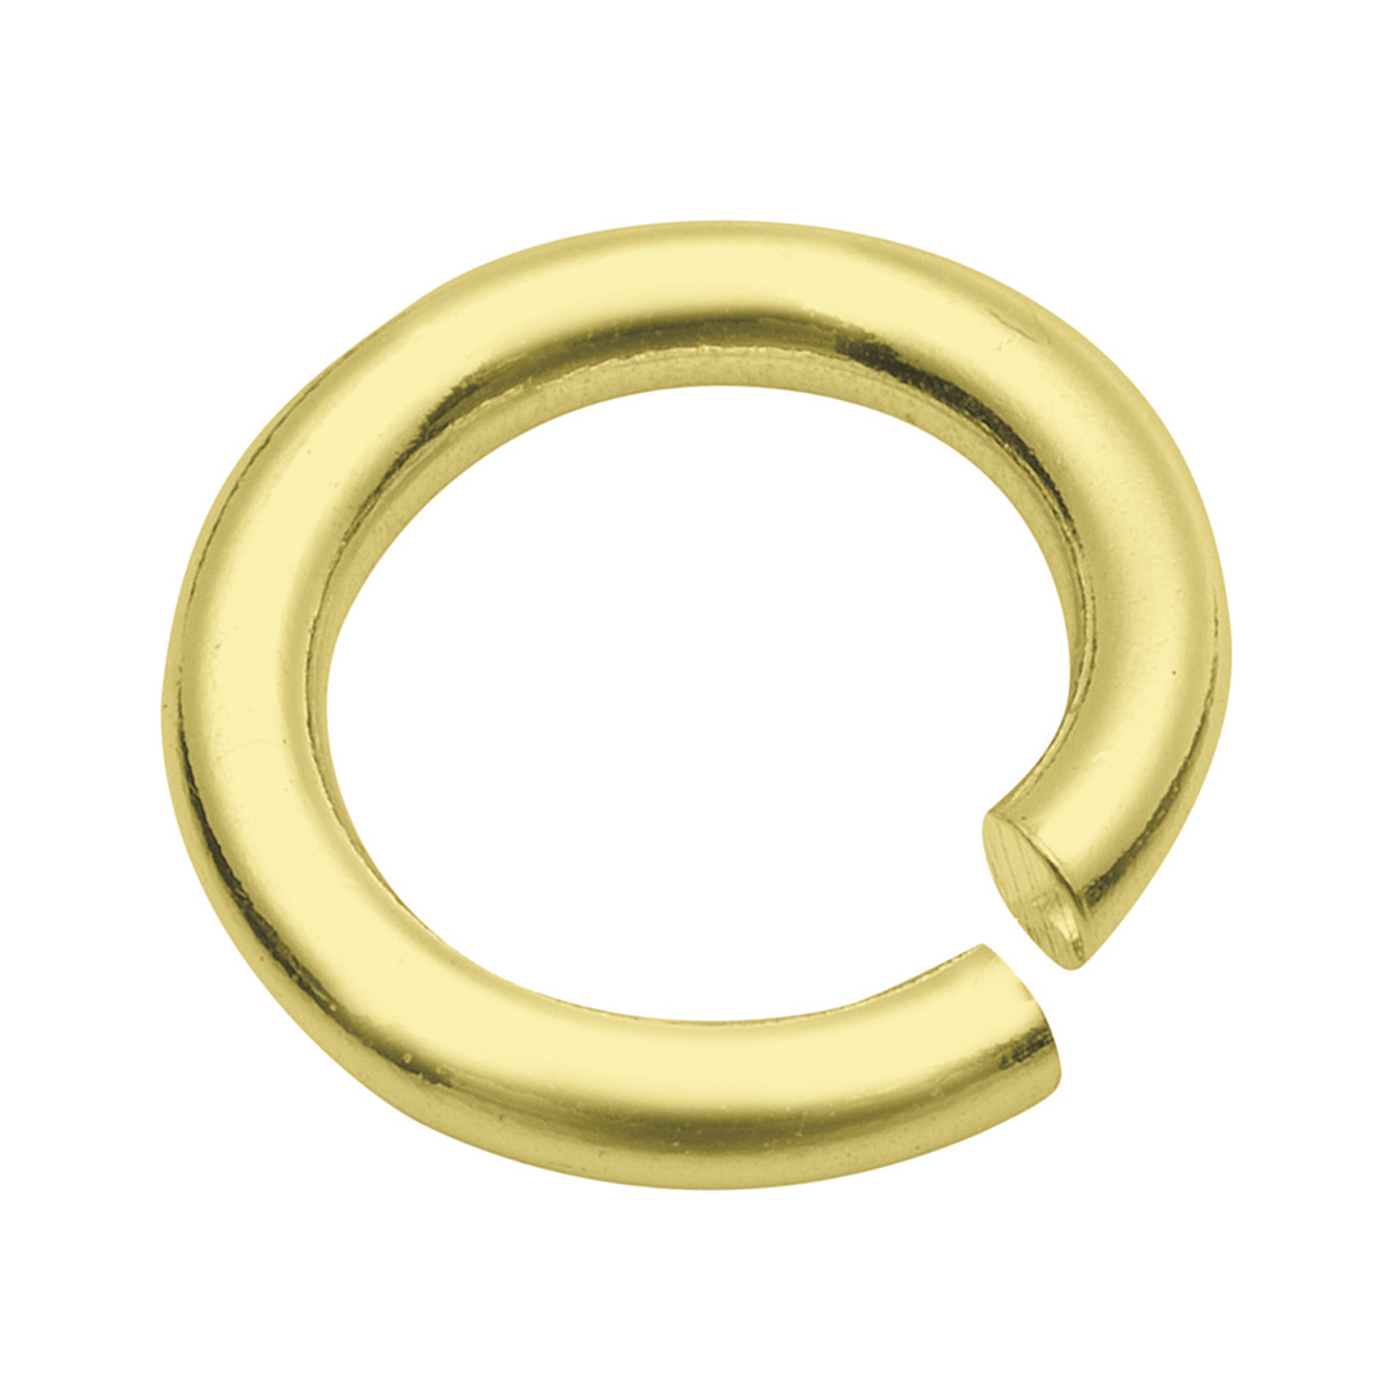 Binding Rings, Round, 333G, ø 10 mm - 5 pieces